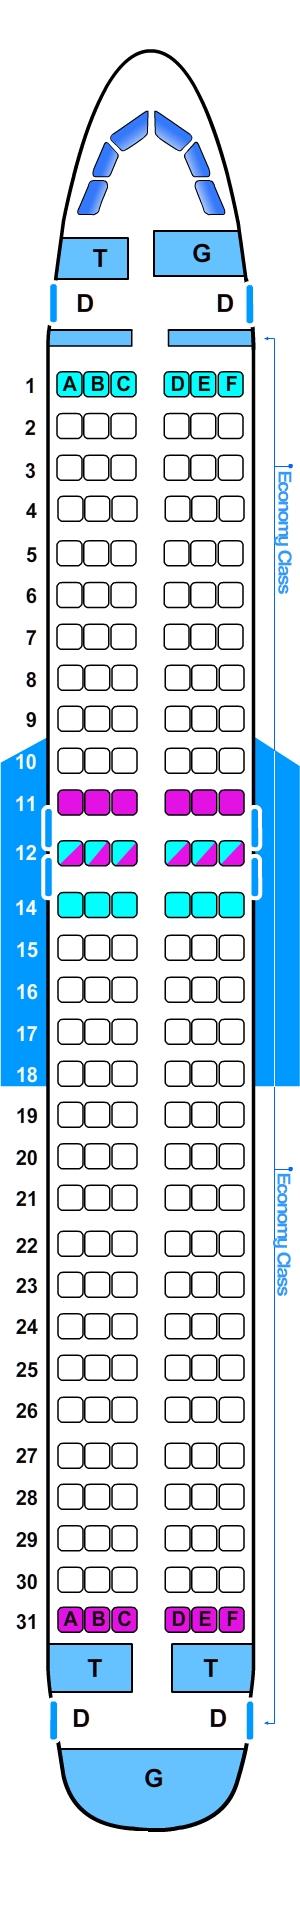 Seat map for Airbus A320